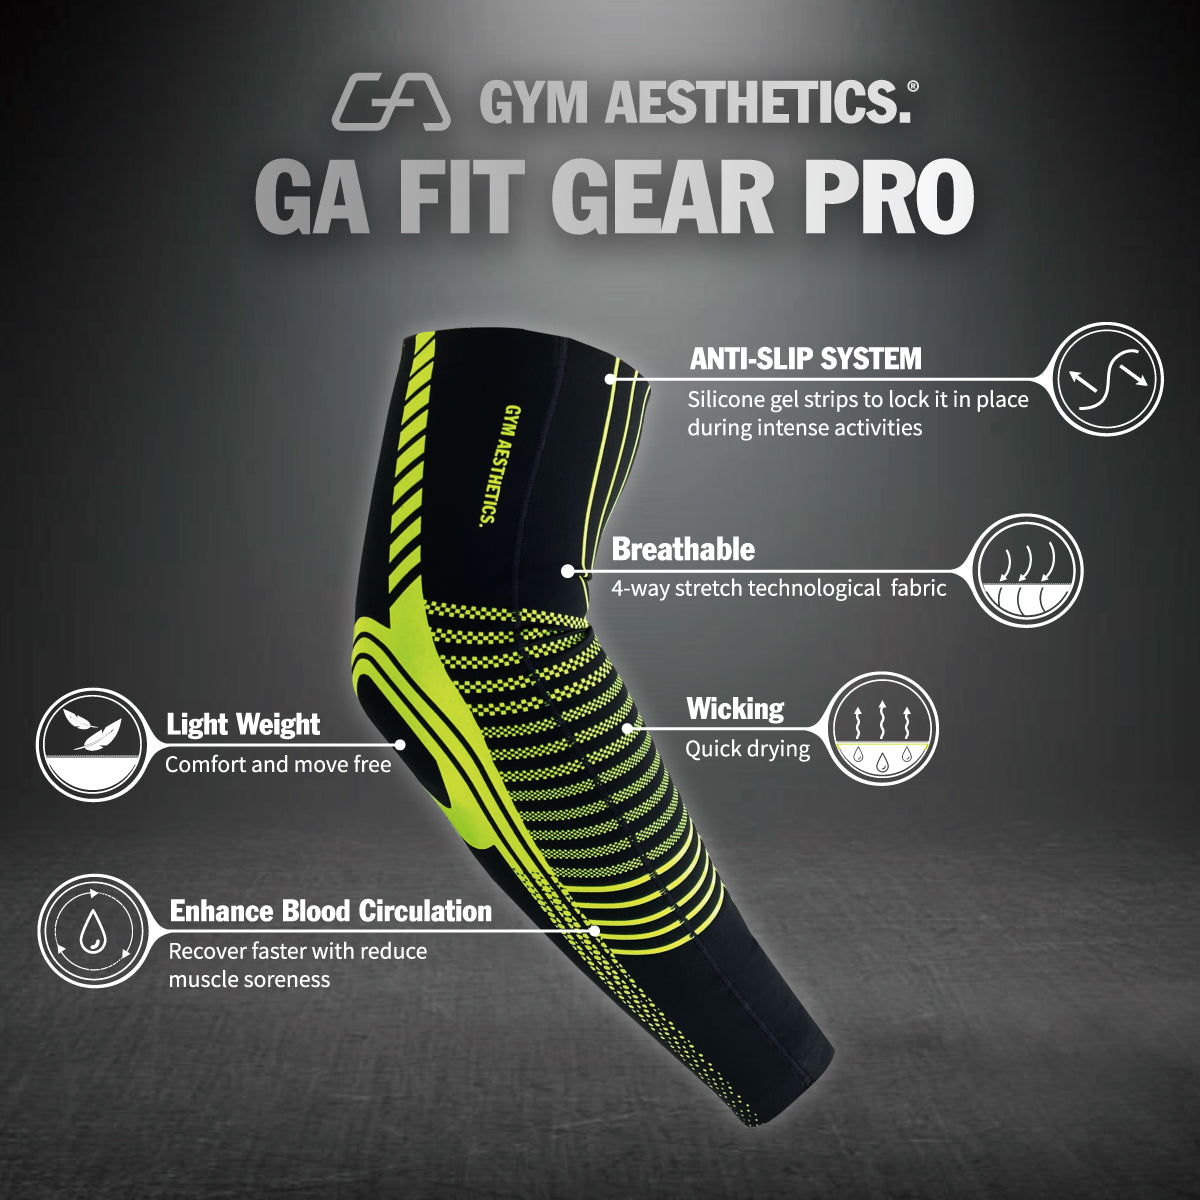 GA Fit Gear PRO - SensELAST® Compression workout sleeve supporting gear ( 1 Piece ) - Features